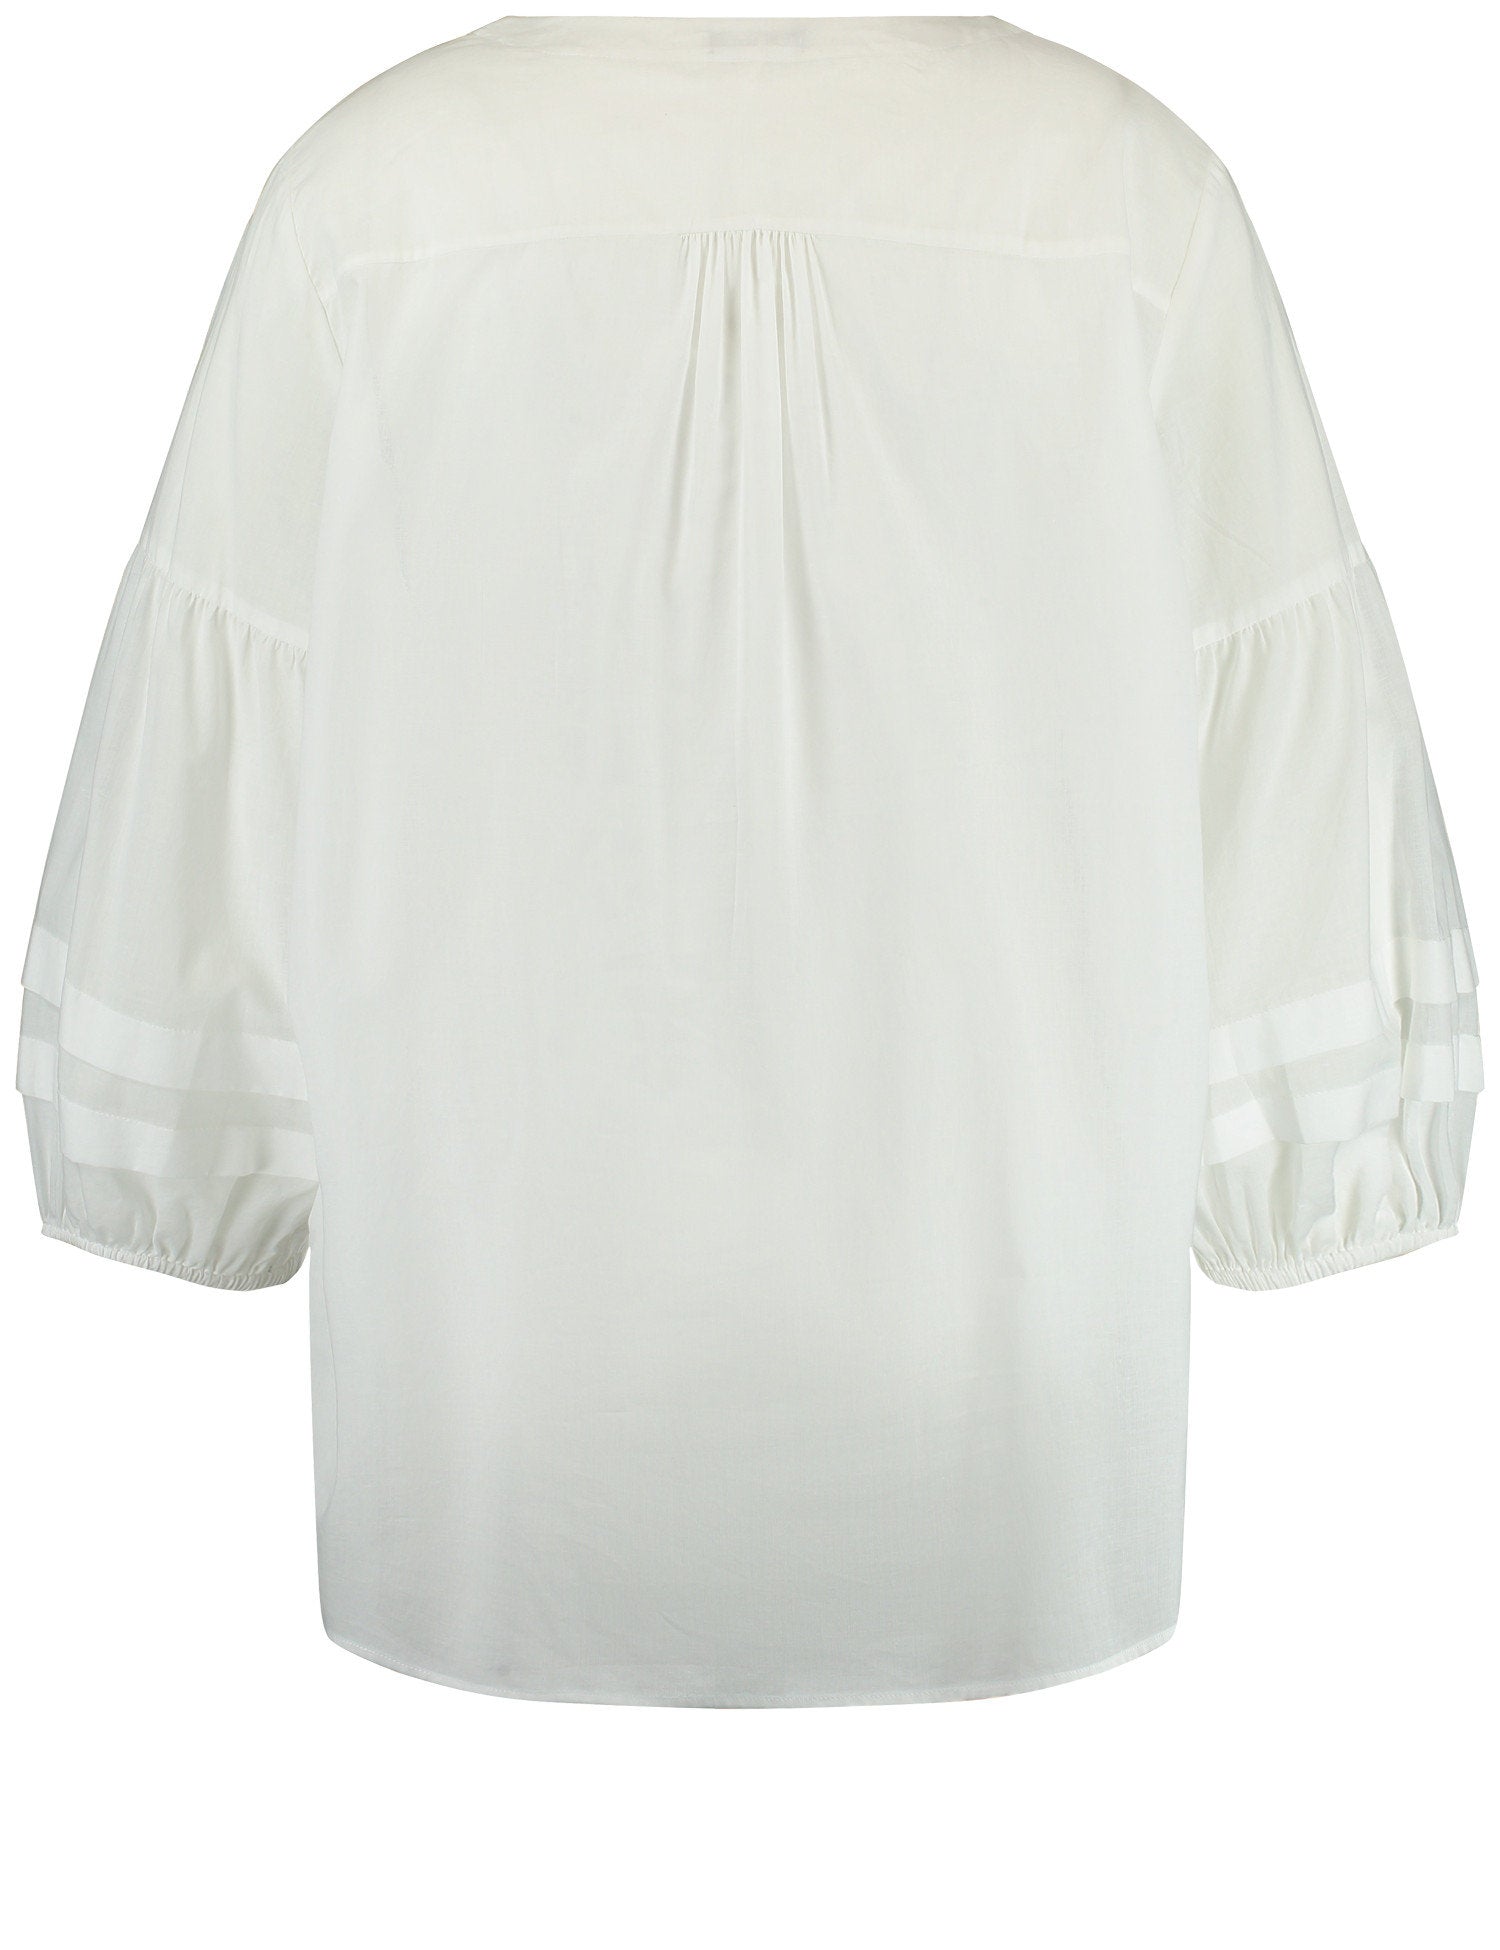 Lightweight Cotton Blouse With Balloon Sleeves_460031-21059_9600_02